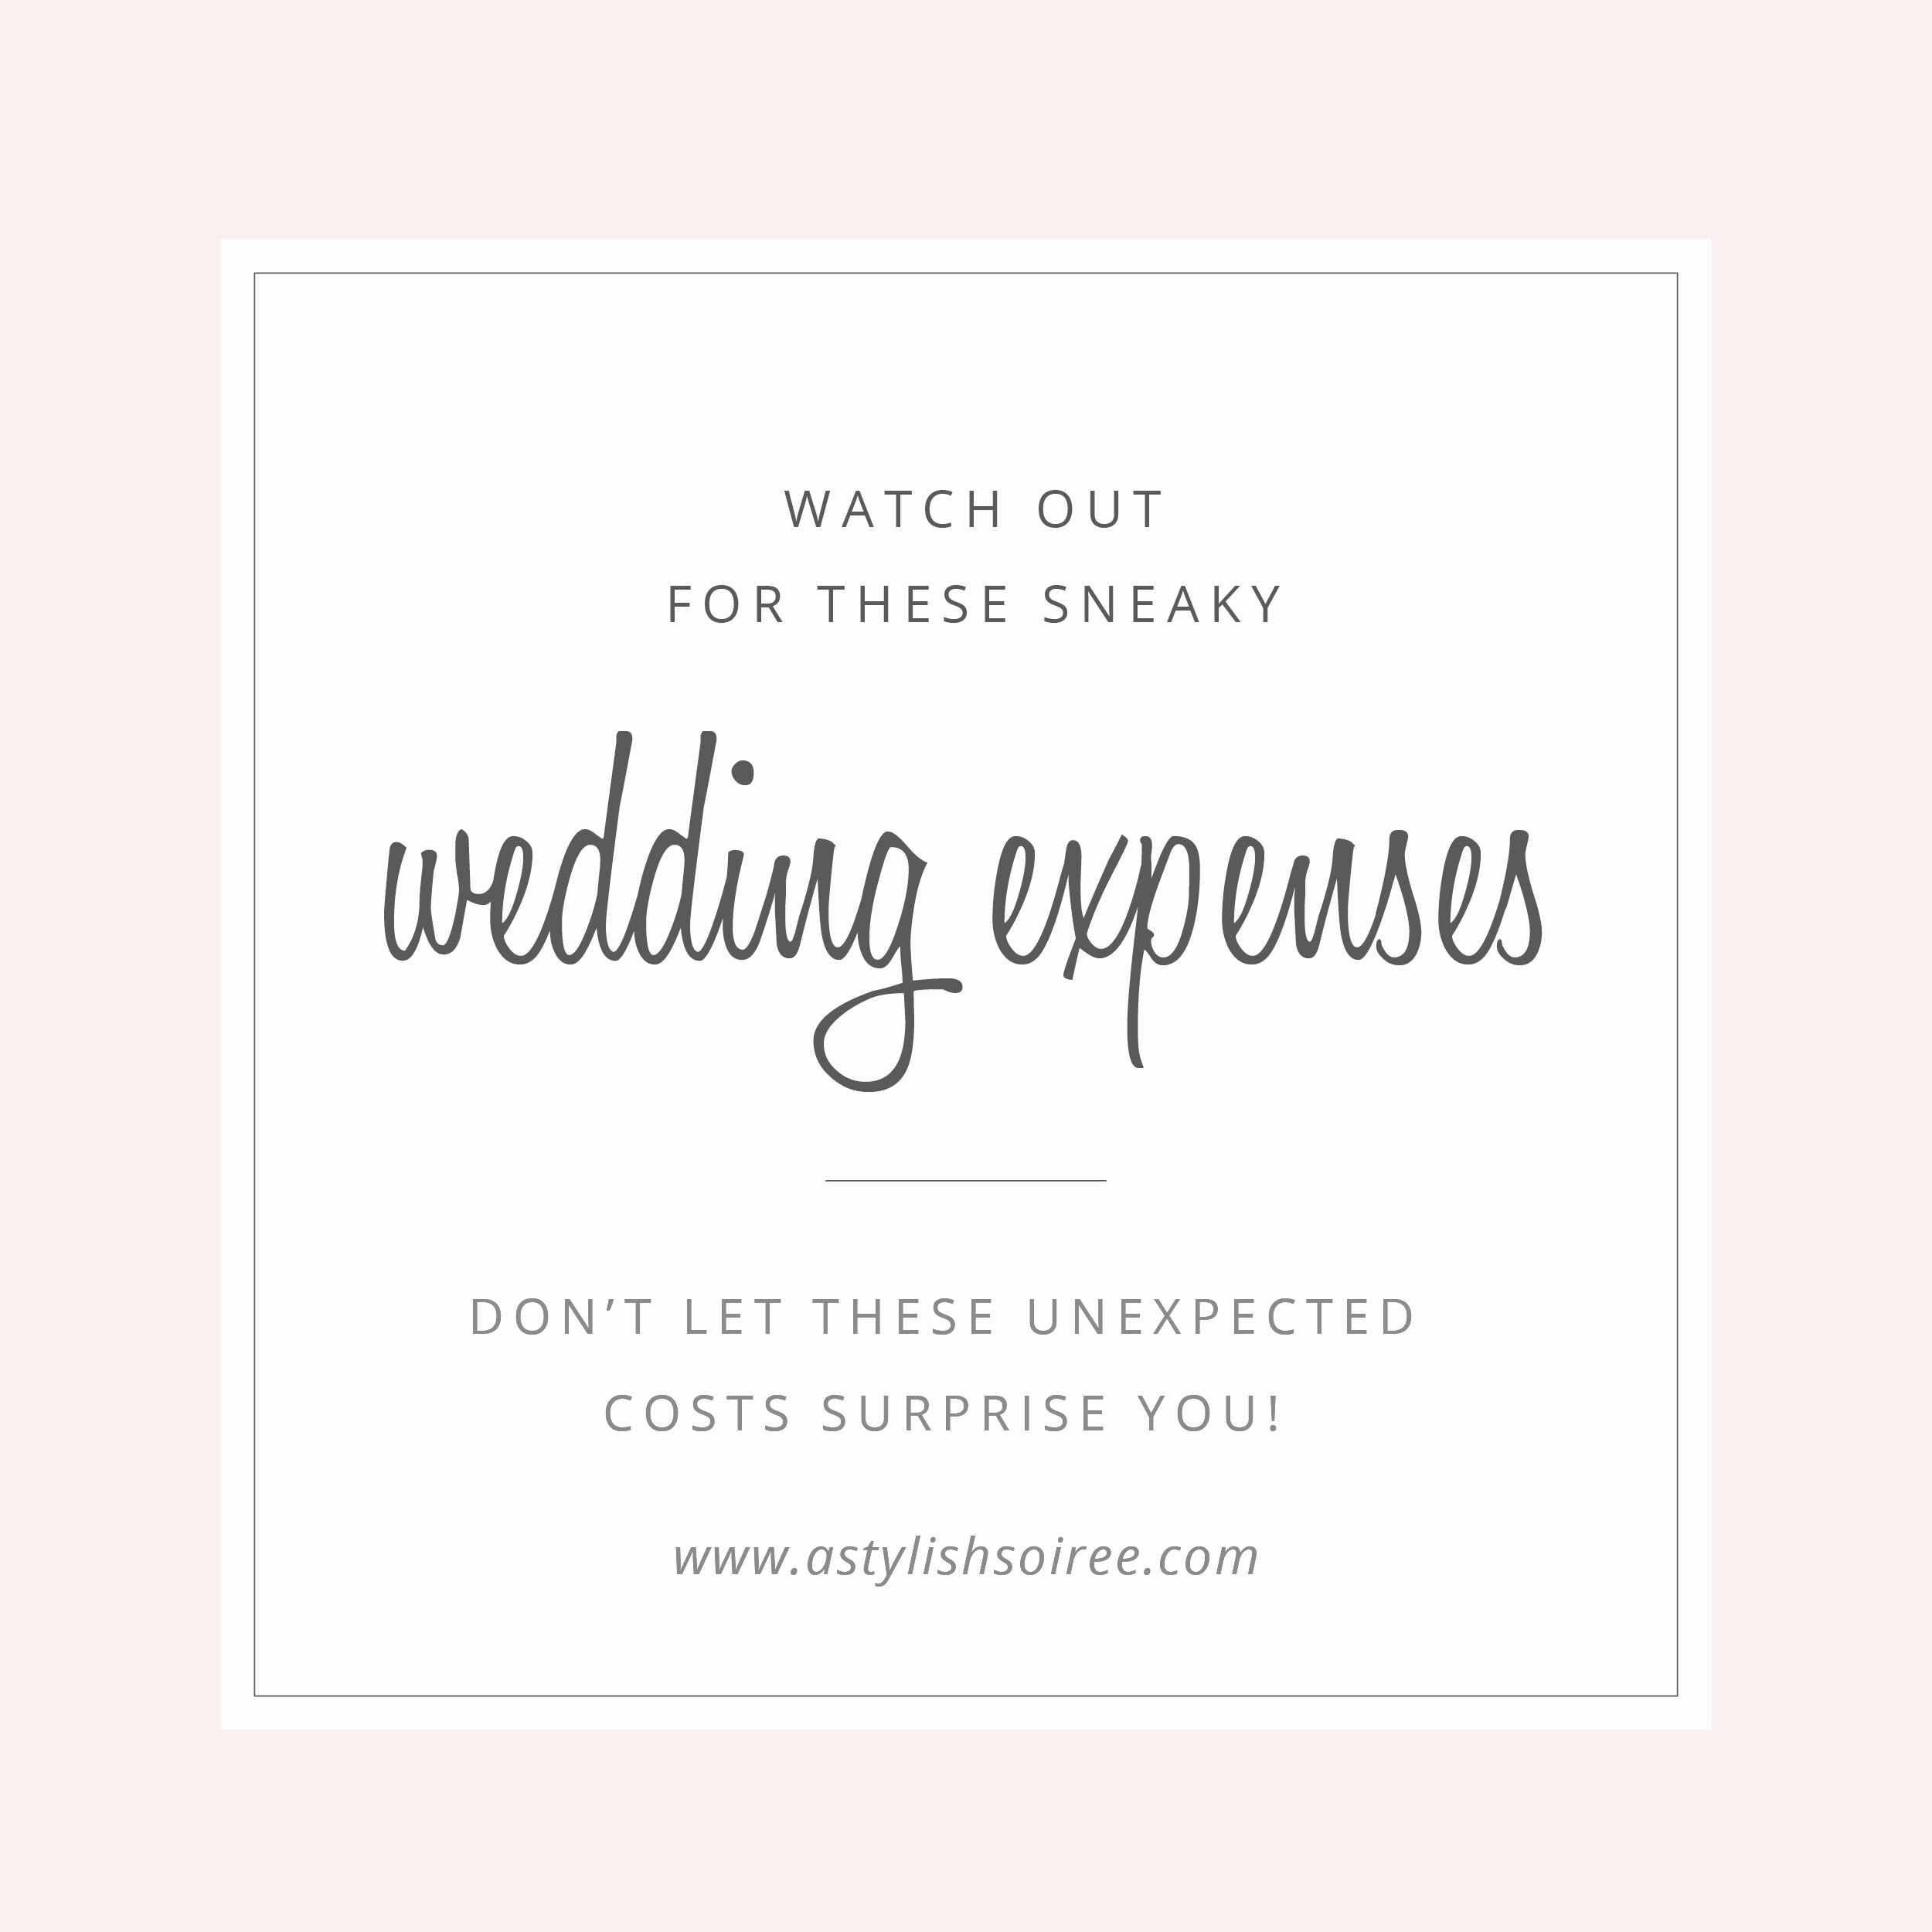 Sneaky Wedding Expenses | A Stylish Soiree: Budget for These Unexpected Wedding Costs